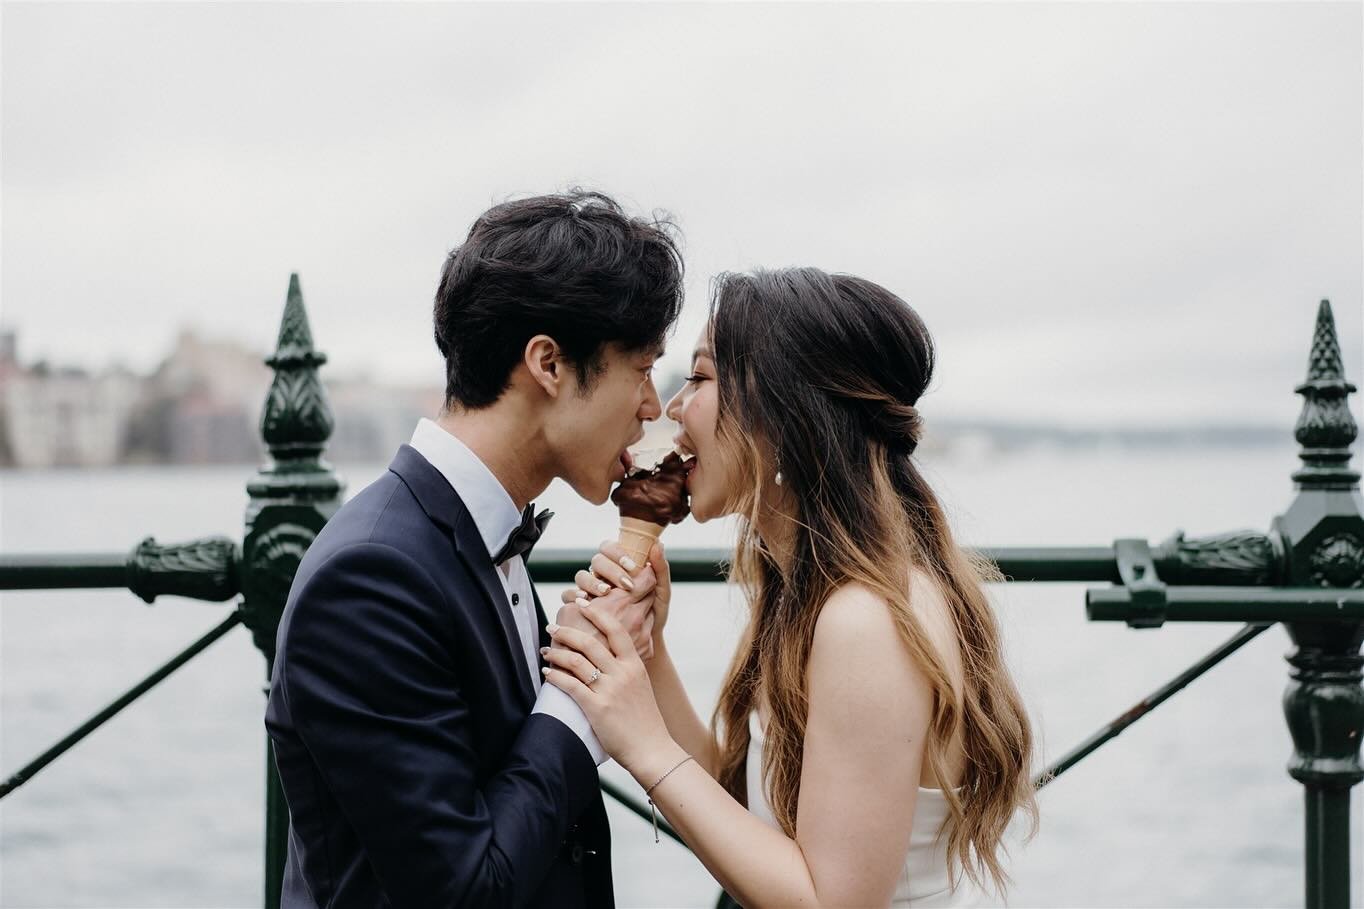 Did someone say ice cream? 🍦 What&rsquo;s your favourite flavour?
Swipe to see more ⬅️
Pre Wedding for these two lovers ❤️

Can&rsquo;t wait to show you the wedding photos too! 🥰

#prewedding #preweddingphoto #preweddingshoot #icecream #icecreamlov